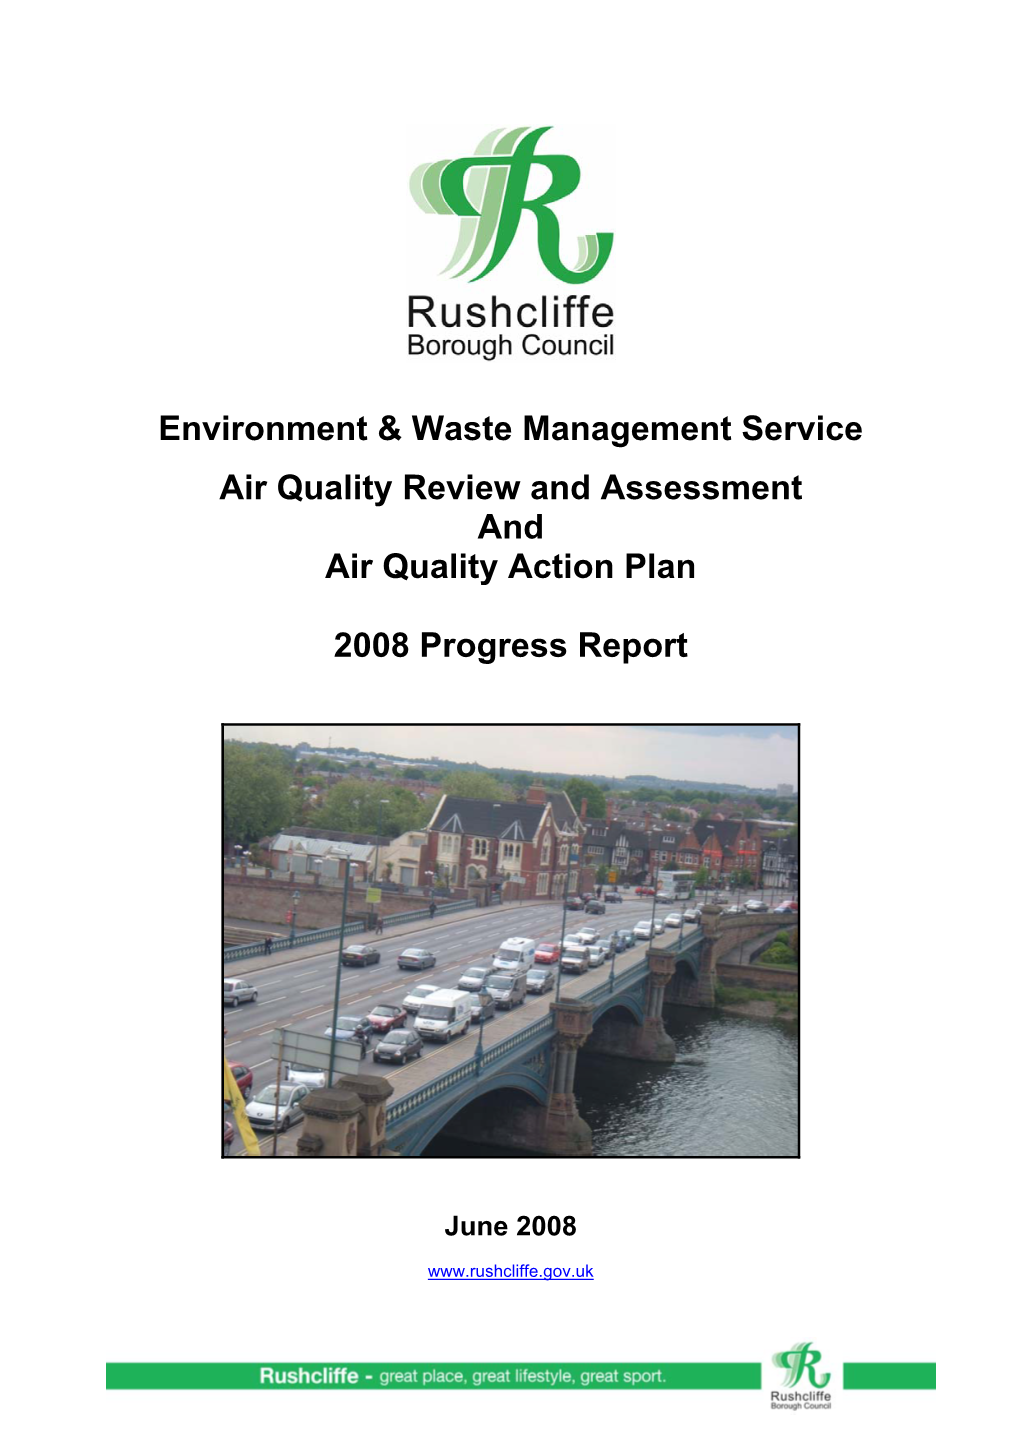 Environment & Waste Management Service Air Quality Review And